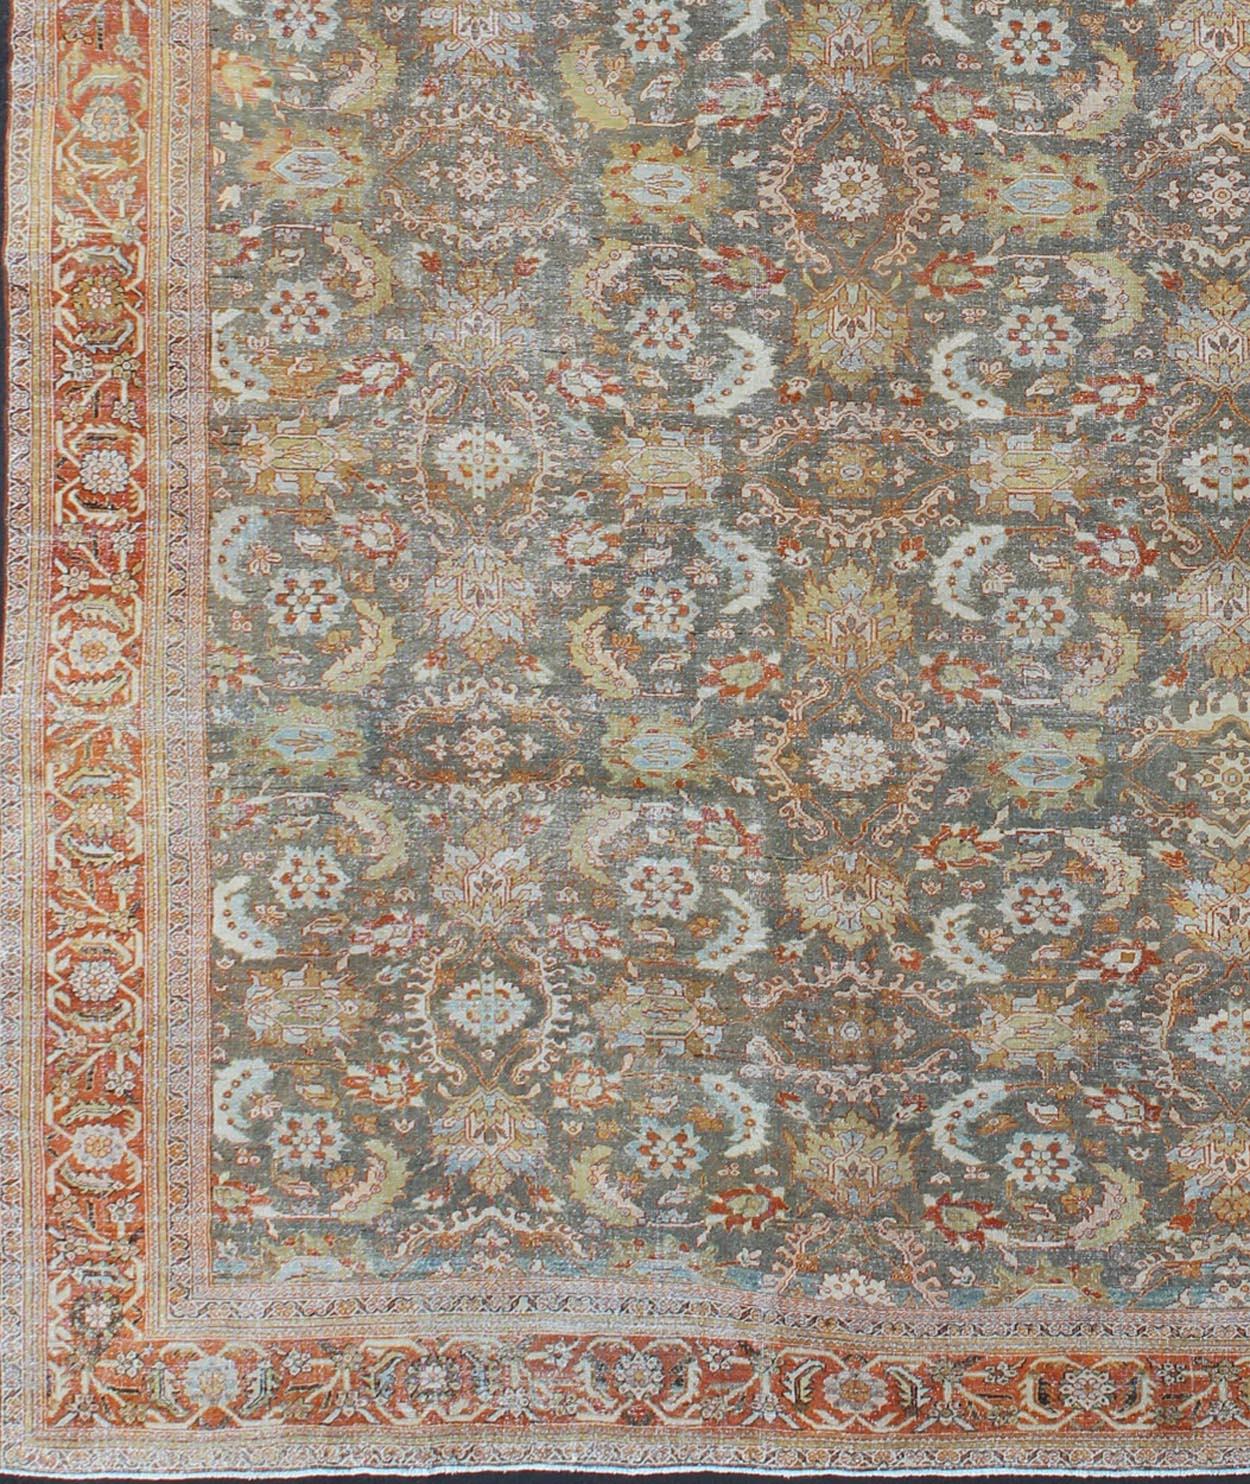 Large antique Persian Sultanabad rug in gray/green, lime green, light blue, yellow, cream, faded gold, salmon, light green and rust/red, rug 18-0301, country of origin / type: Iran / Mahal, circa 1900

Measures: 13'3 x 19'8.

This antique Persian